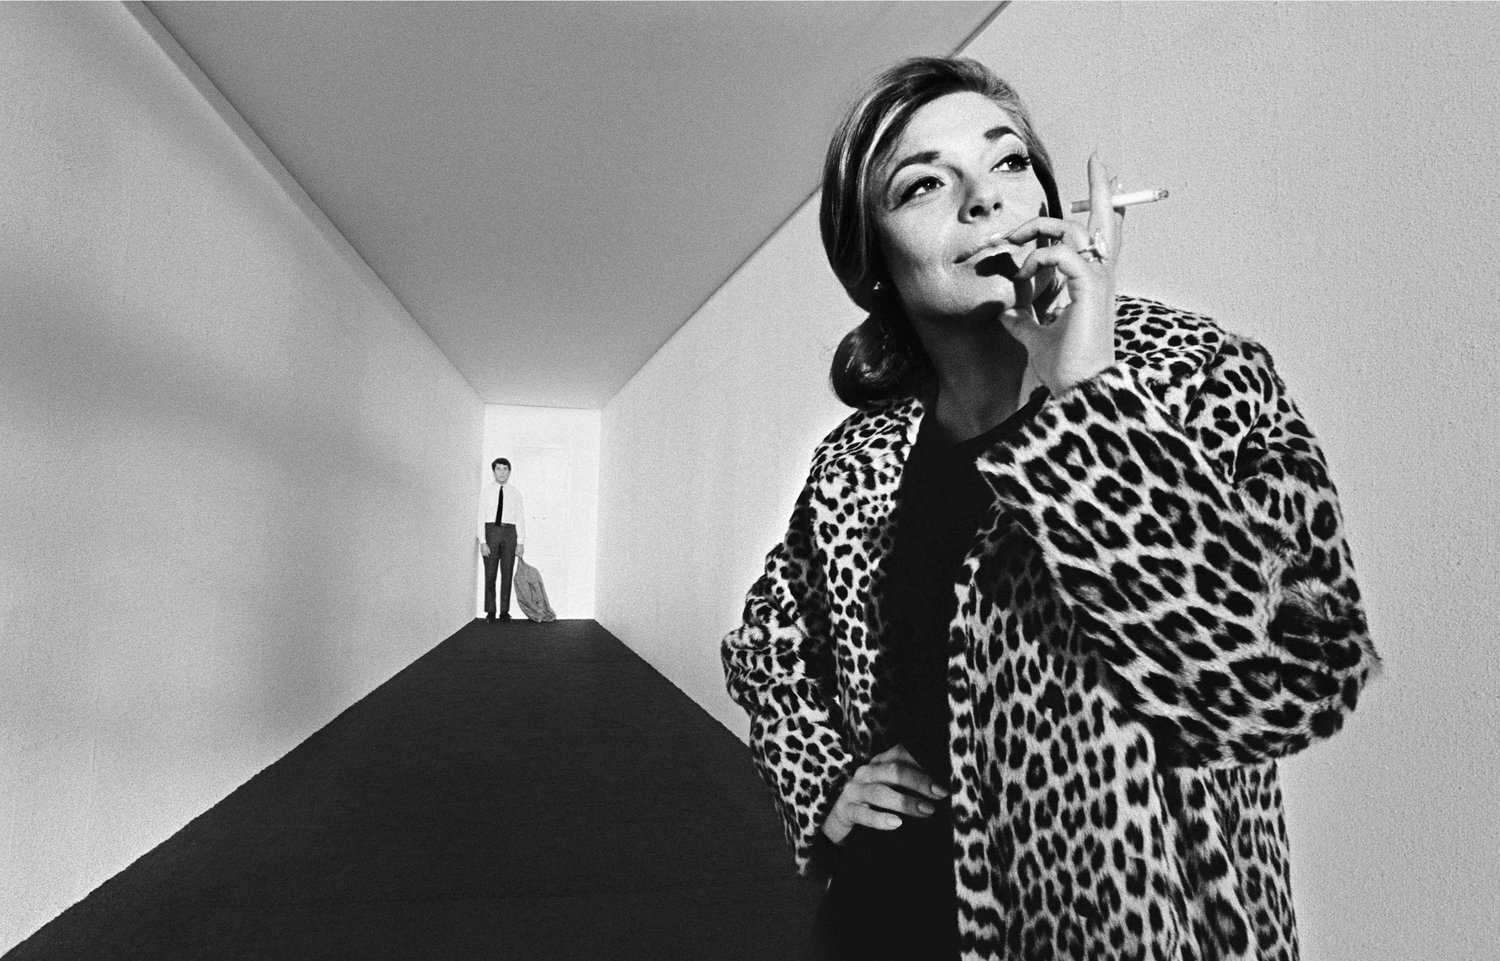 Dustin Hoffman & Anne Bancroft on a specially constructed set on 'The Graduate', 1967